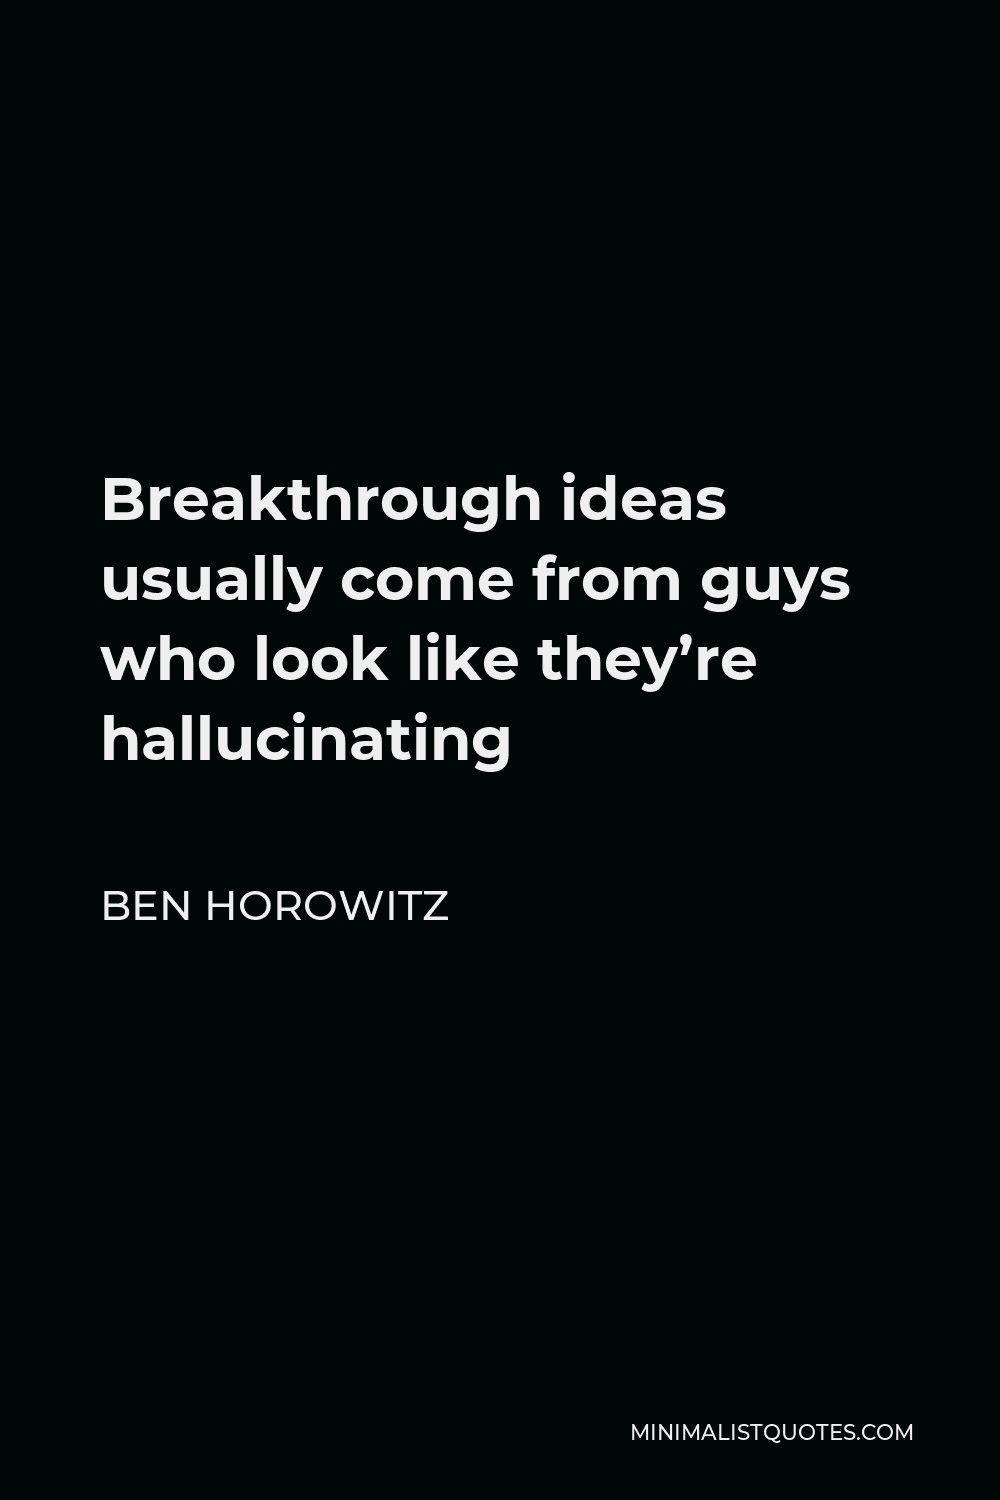 Ben Horowitz Quote - Breakthrough ideas usually come from guys who look like they’re hallucinating